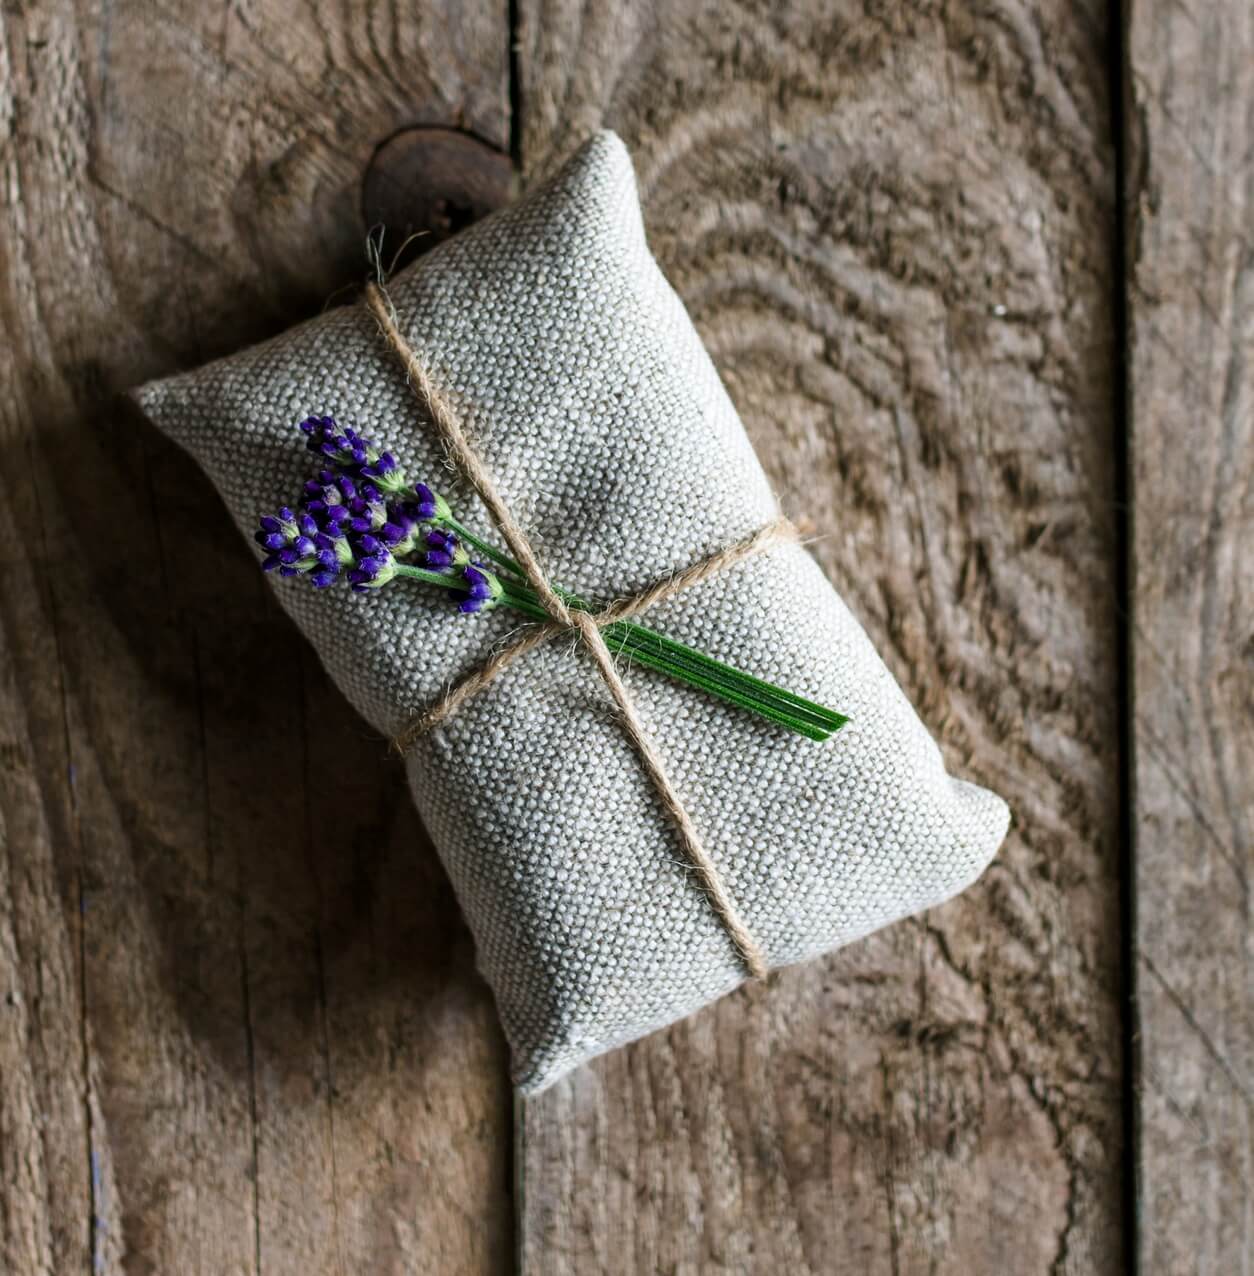 4 Different Ways to Use Lavender in Handmade Gifts